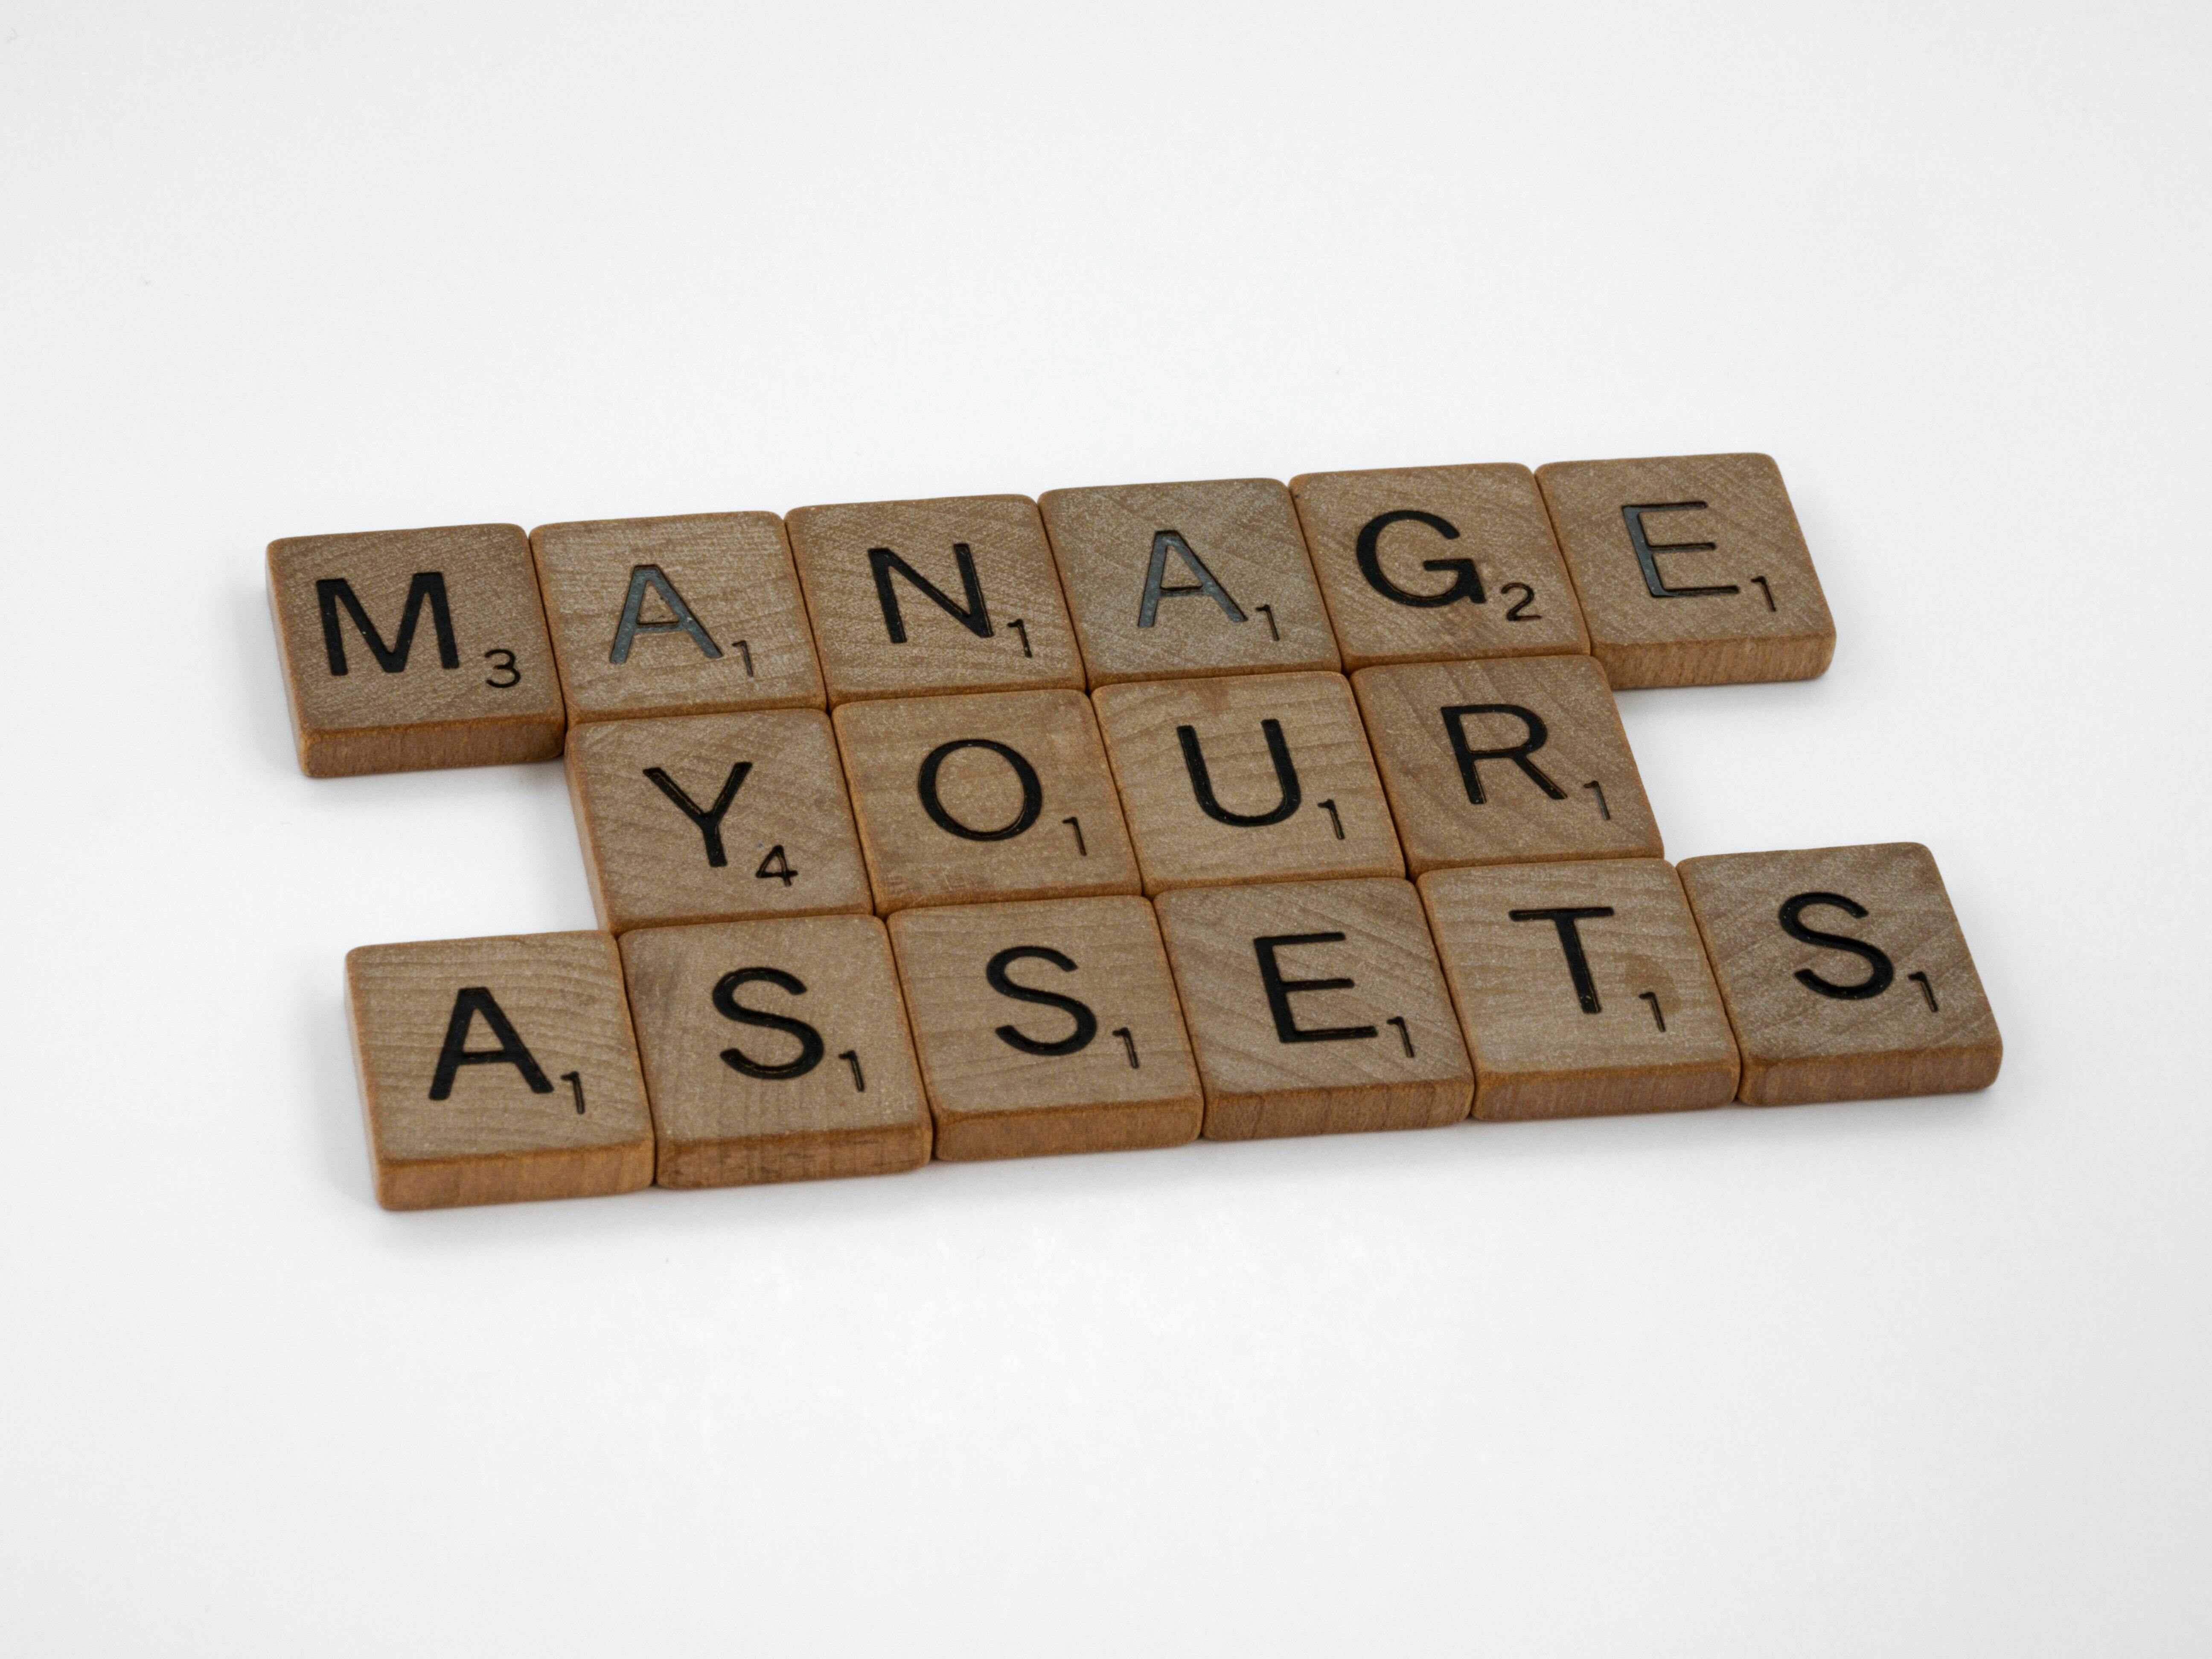 Enterprise digital asset management: Everything you want to know
